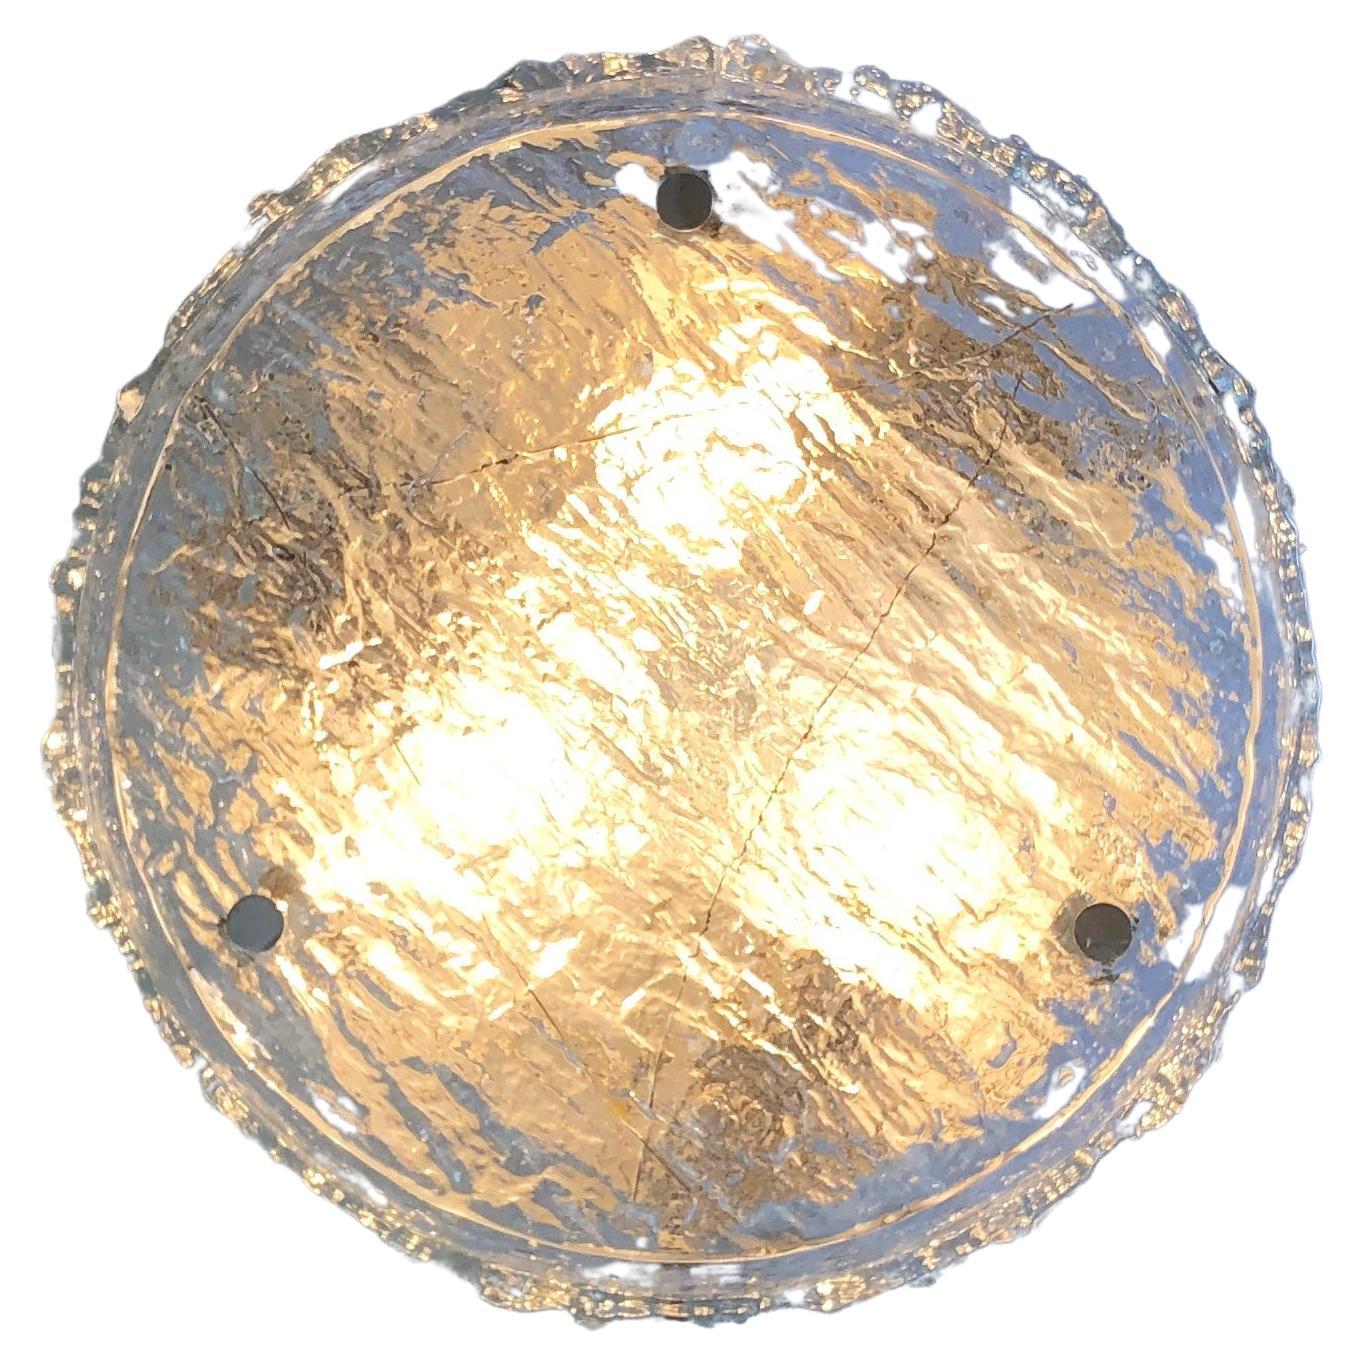 Magnificent, concealed base ceiling lamp by 'Kaiser Leuchten', Germans famous mid century manufacturer of high-end design lighting.
Comes in a round shape, hand made from transparent (no colour) Murano glas, also known as ‘ice glas’.
Thick glas